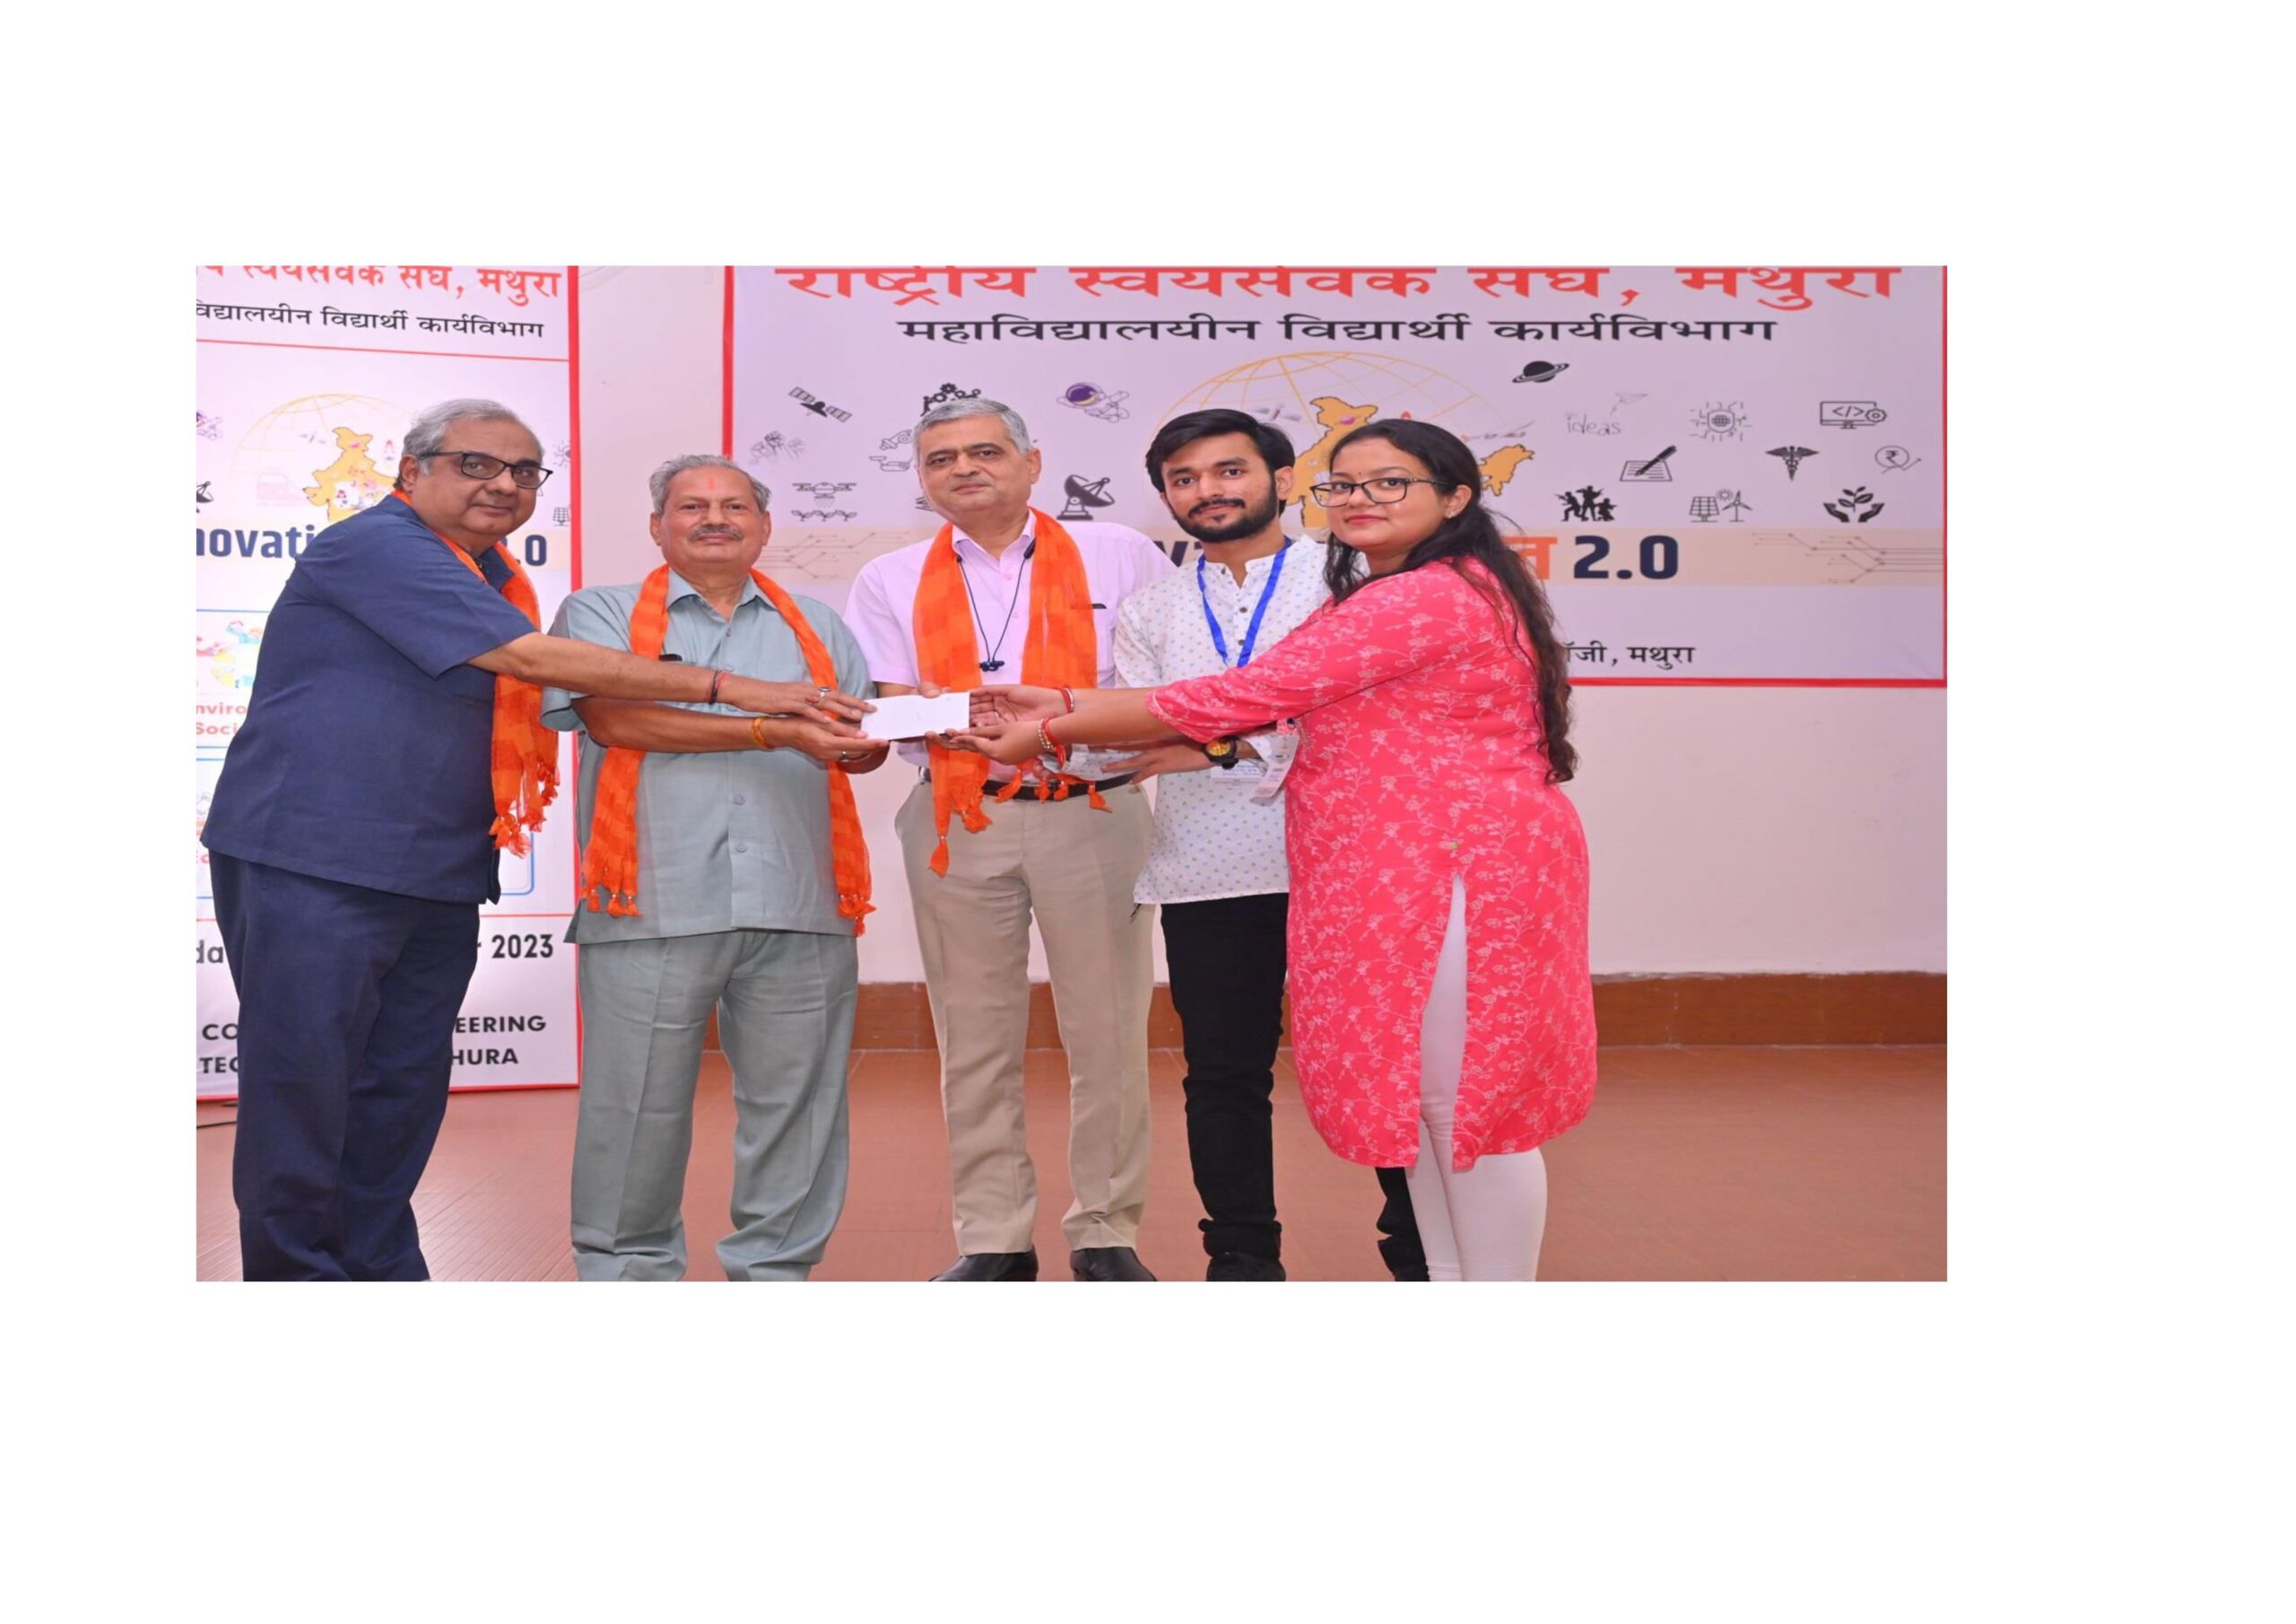 Congratulations to Aditya Maheswari & Ishita Singh won first prize in health and medical category in Inter-university competition (innovative Bharat 2.0) organized by  RSS, Mathura